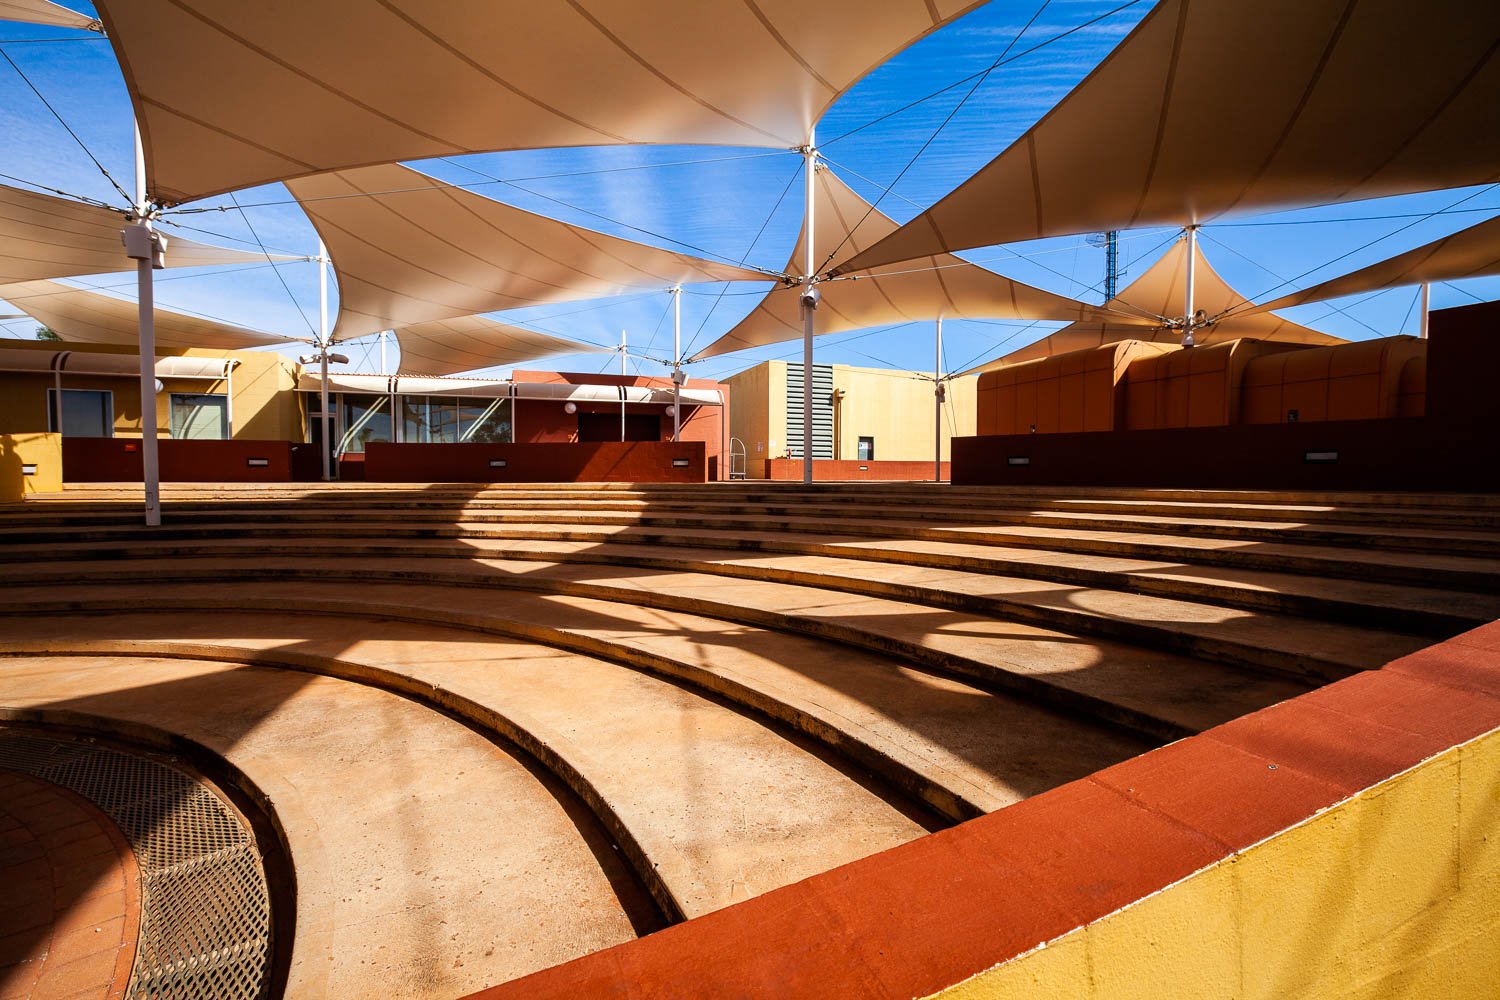 The beautiful inside architecture of a big lobby with lite rays of sunlight coming in, Yulara Resort #5 - Red Centre NT